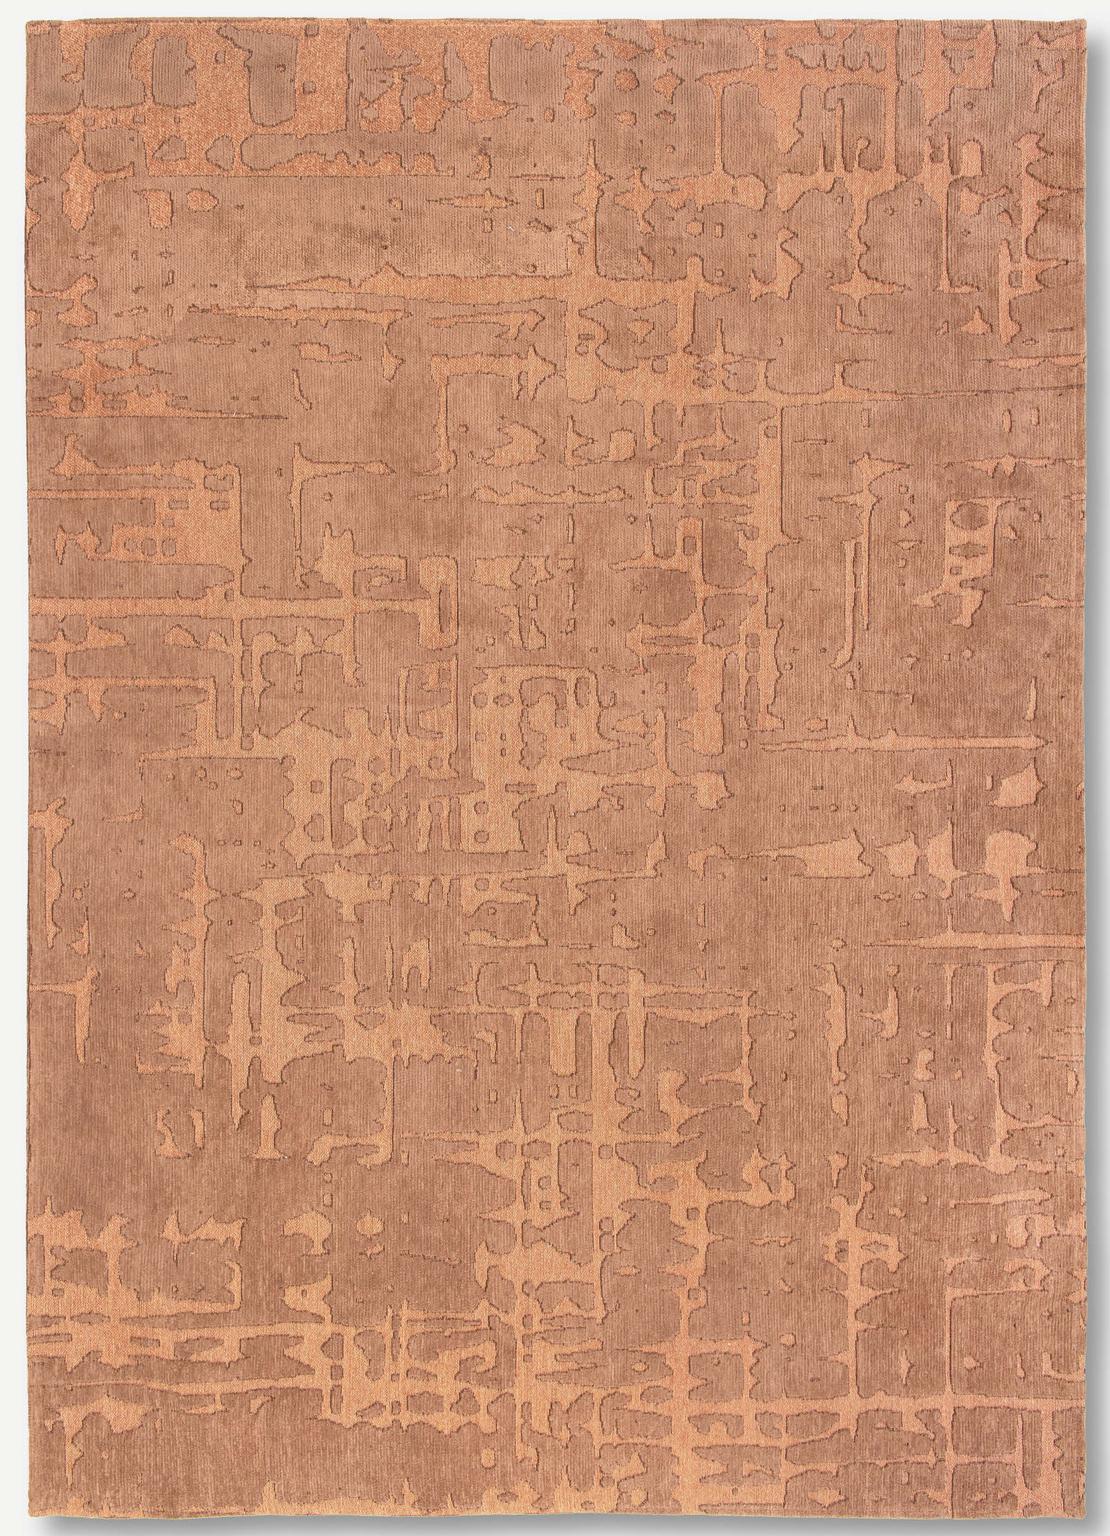 Abstract Brown Belgian Rug ☞ Size: 5' 7" x 8' (170 x 240 cm)